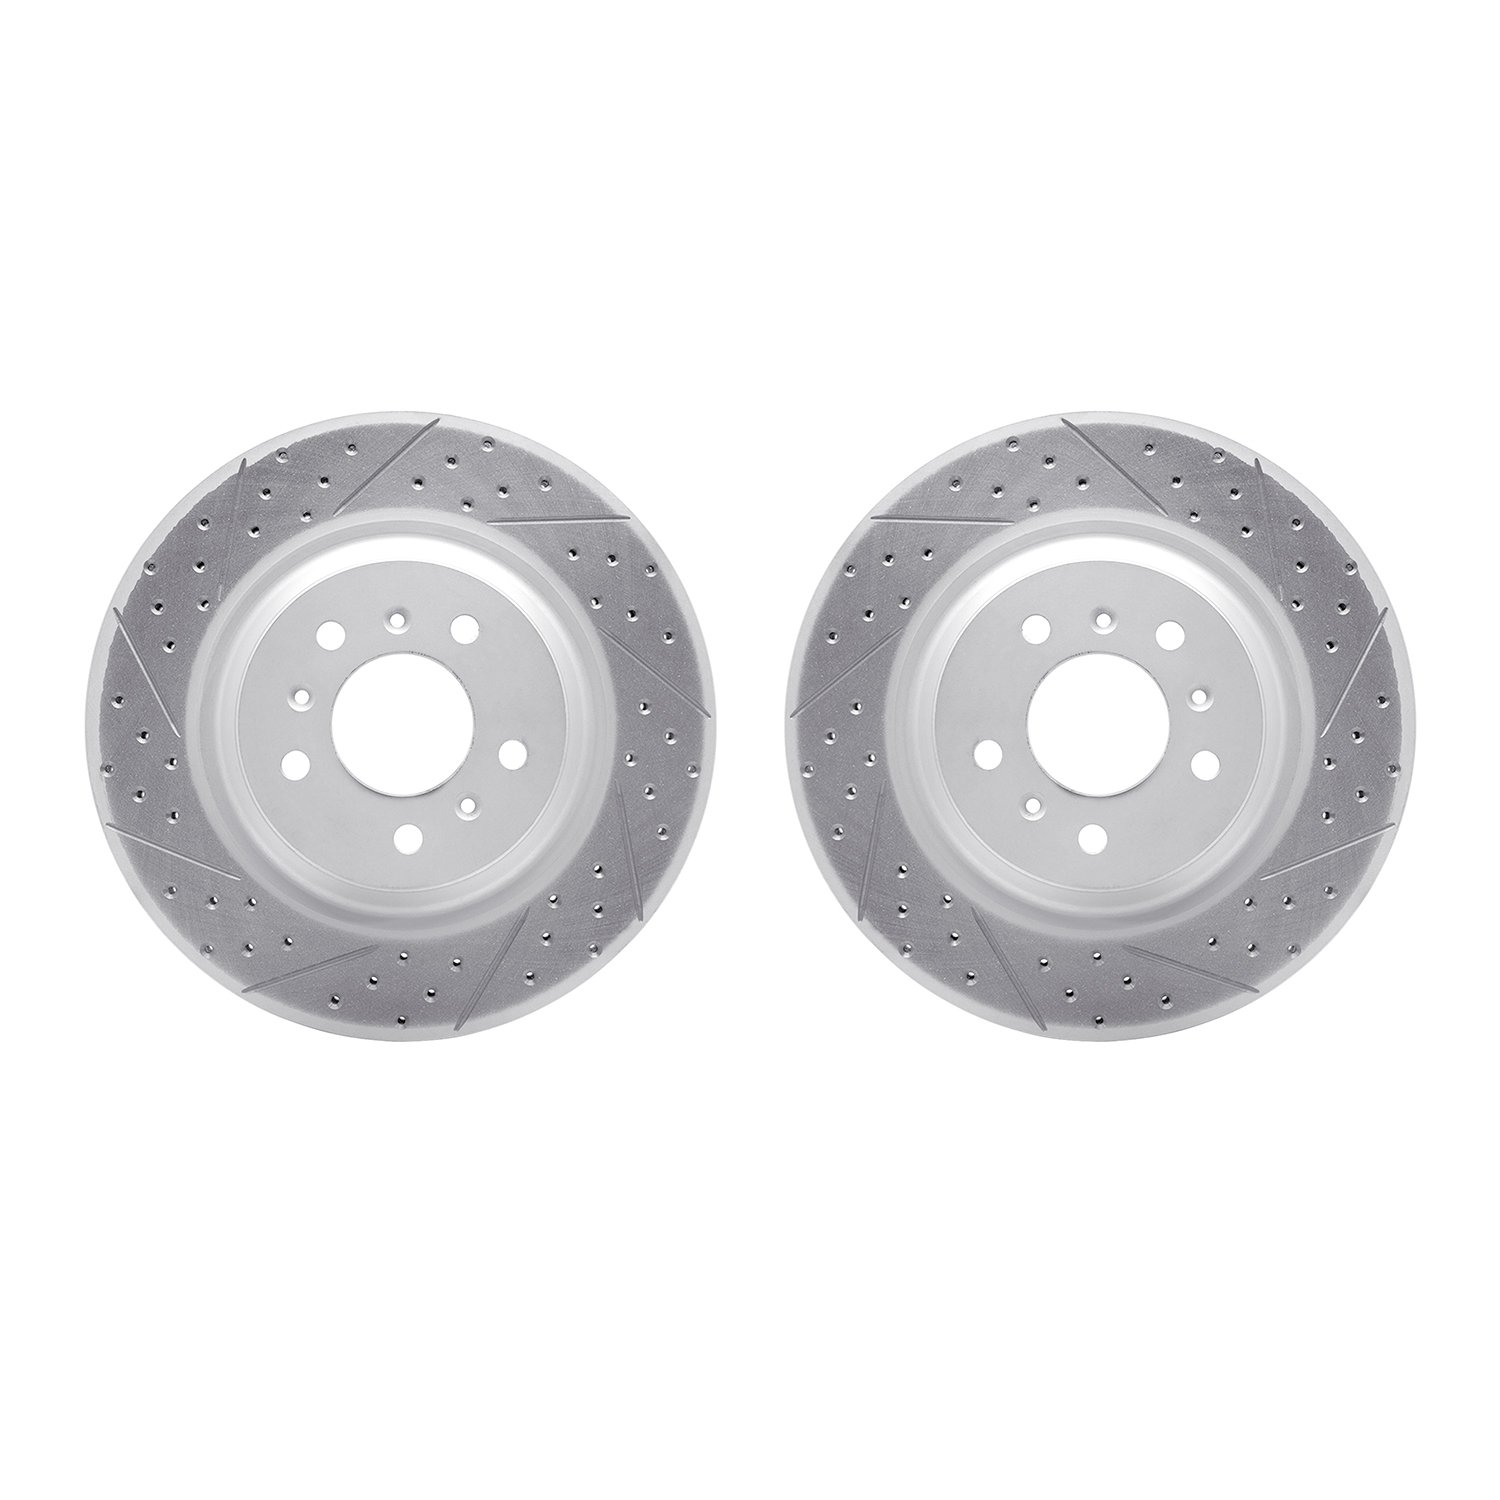 2002-46000 Geoperformance Drilled/Slotted Brake Rotors, 2006-2016 GM, Position: Front